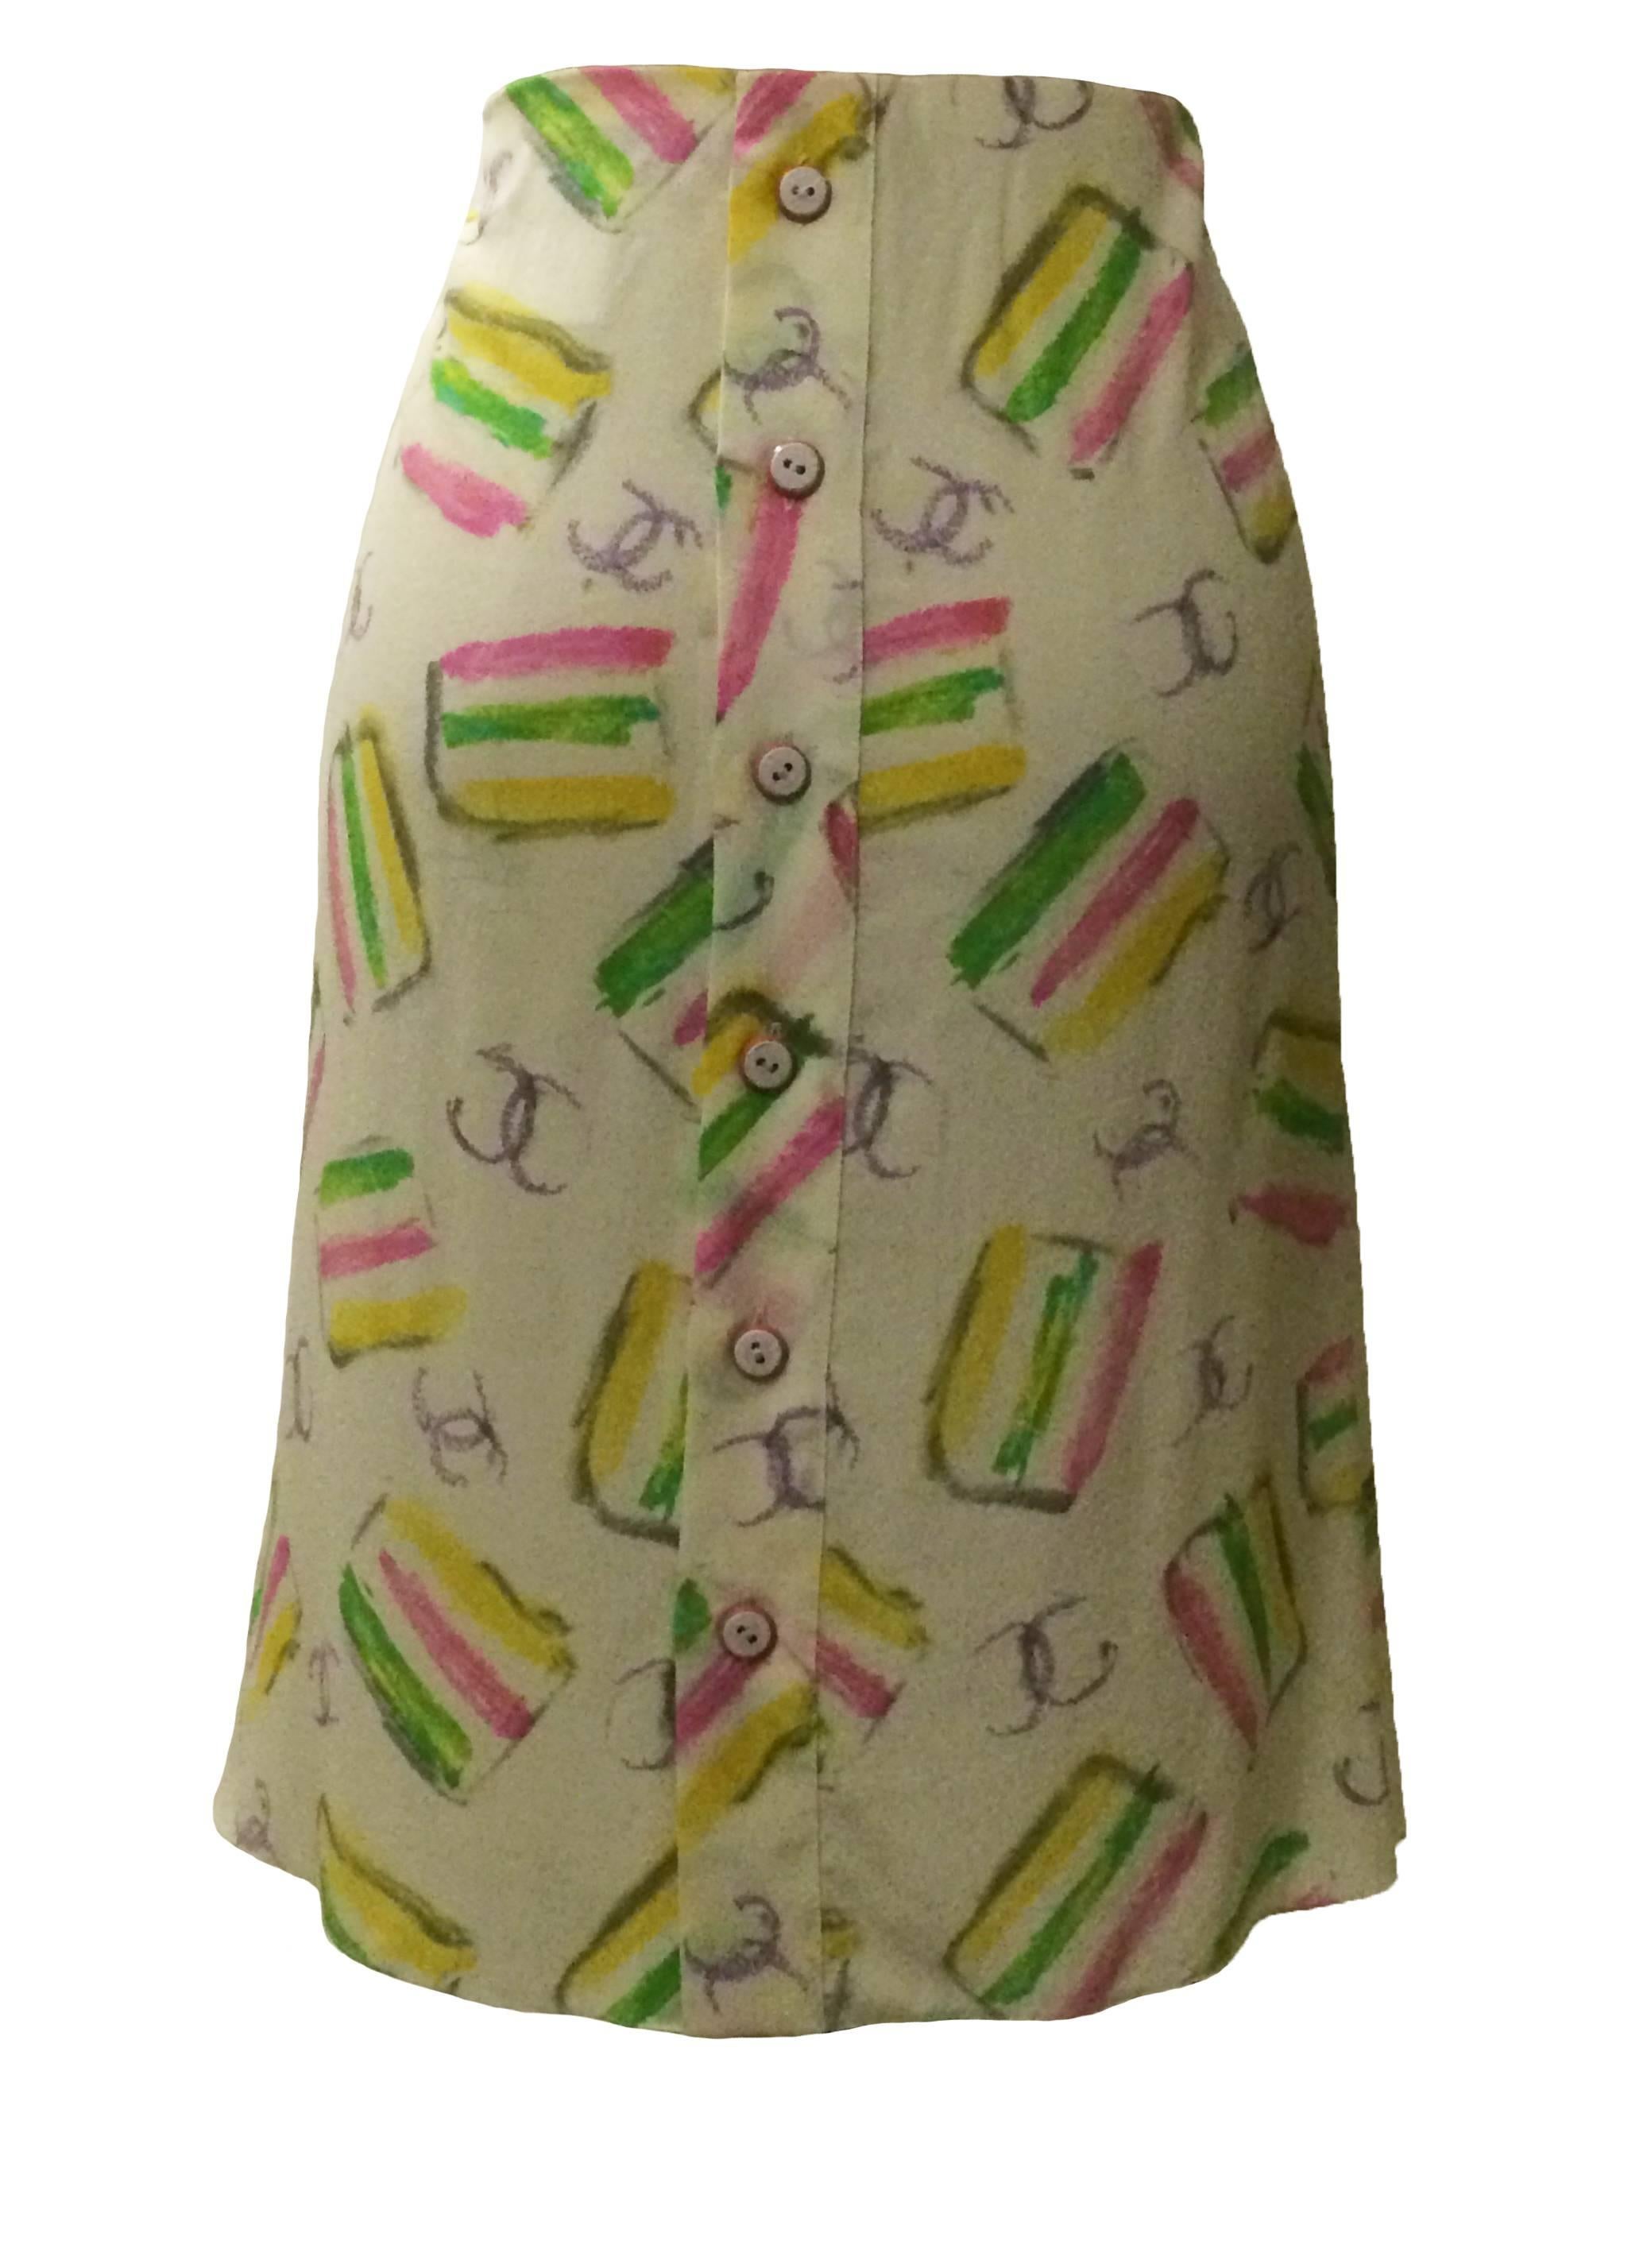 Chanel silk skirt in colorful print from the 2004 cruise collection. Draped ruffle at front. Buttons up back. Buttons read 'Chanel, Paris.'

100% silk.

Made in France.

FR 40, approximate US 8/10.
Waist 32